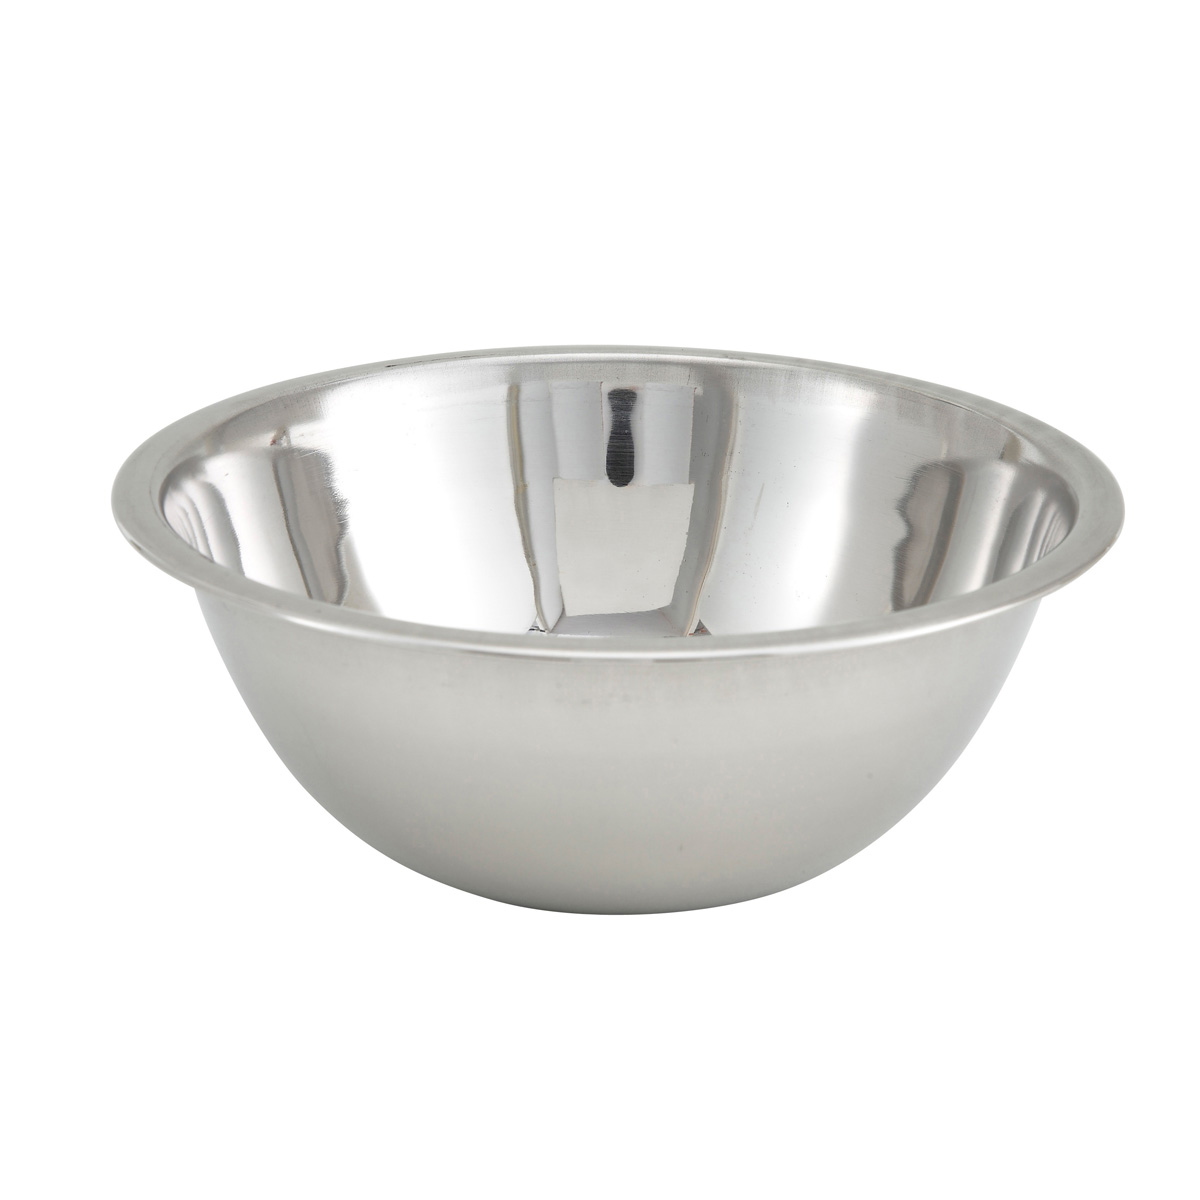 Winco MXBT-150Q 1-1/2 quarts, 7-7/8" dia, 2-7/8"H Stainless Steel Mixing Bowl